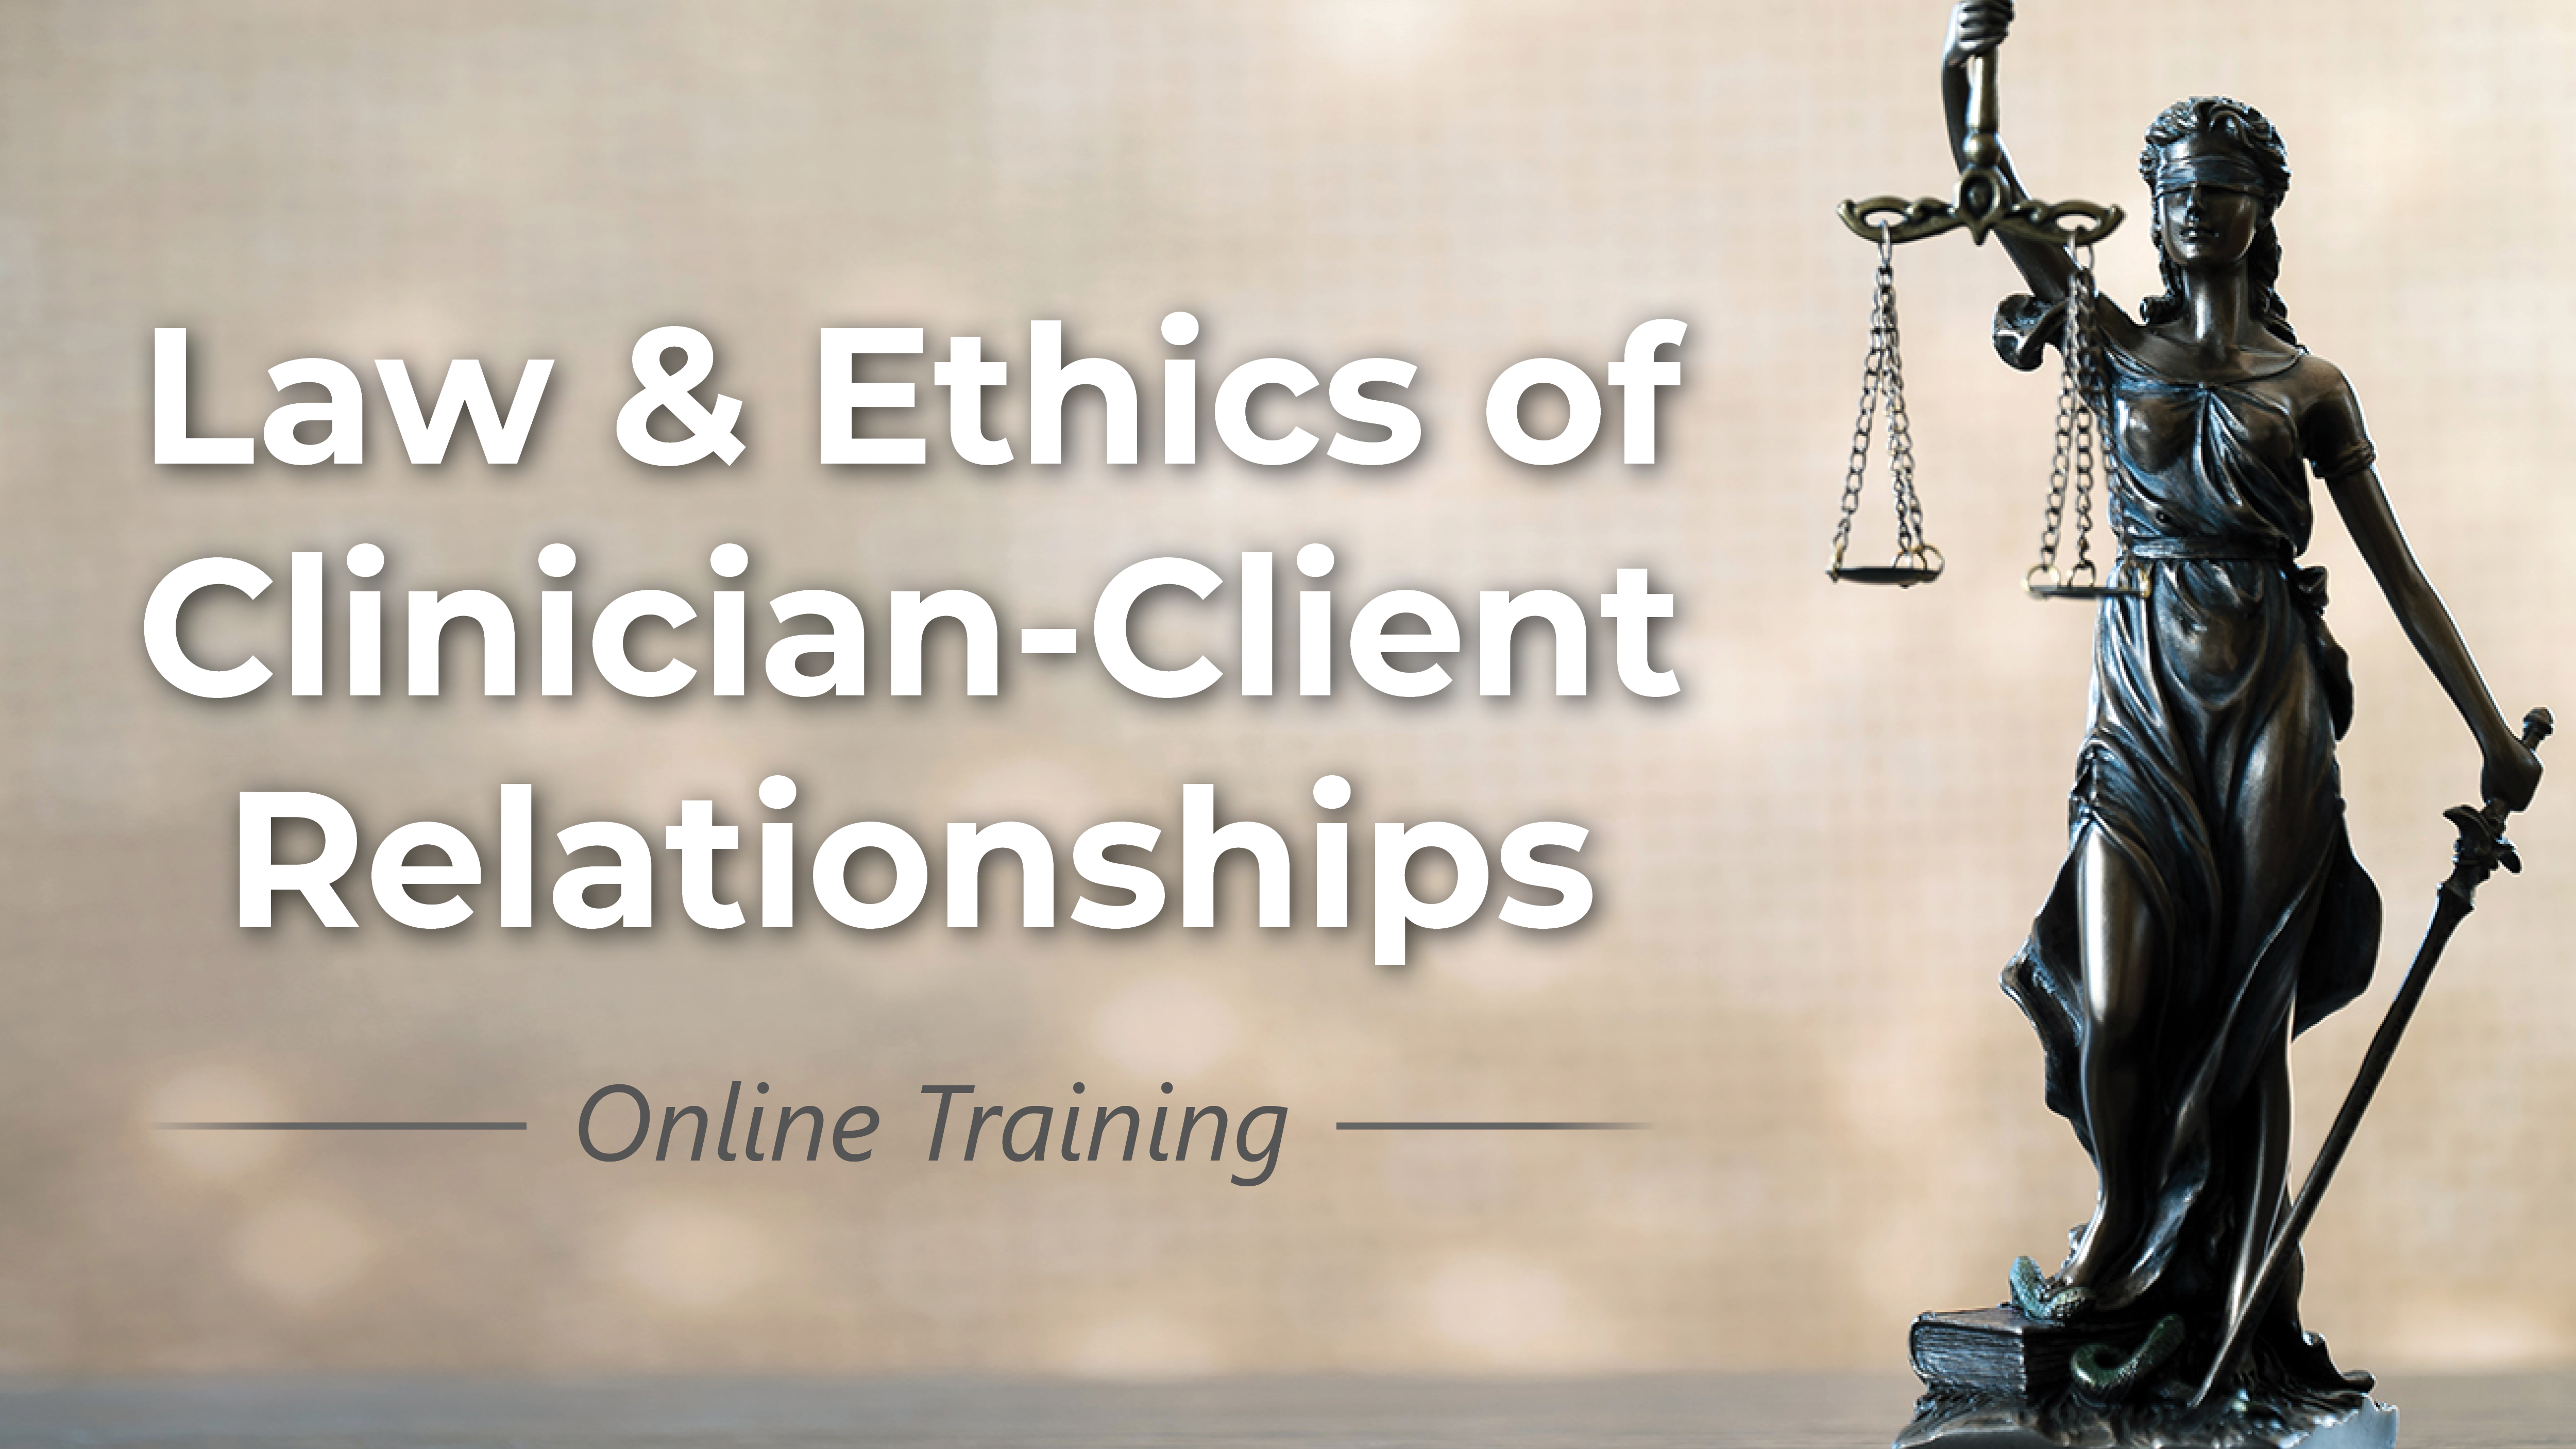 Lady of justice and title of ethics training